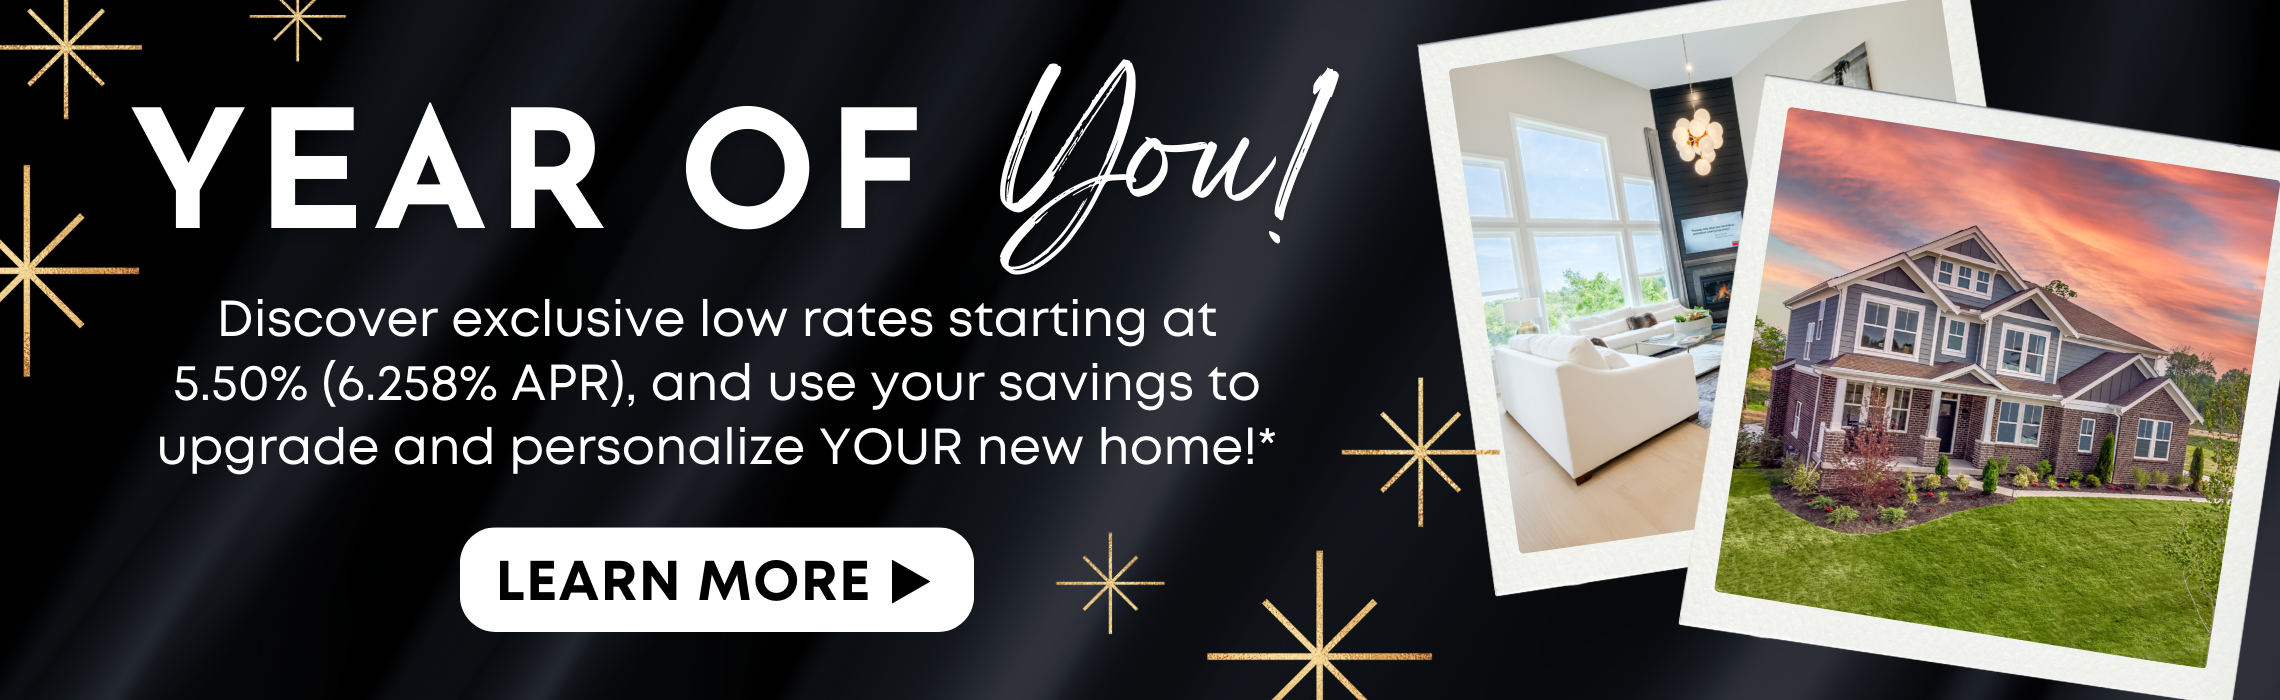 Year Of You! Discover exclusive low rates and use your savings to upgrade and personalize YOUR new home!*